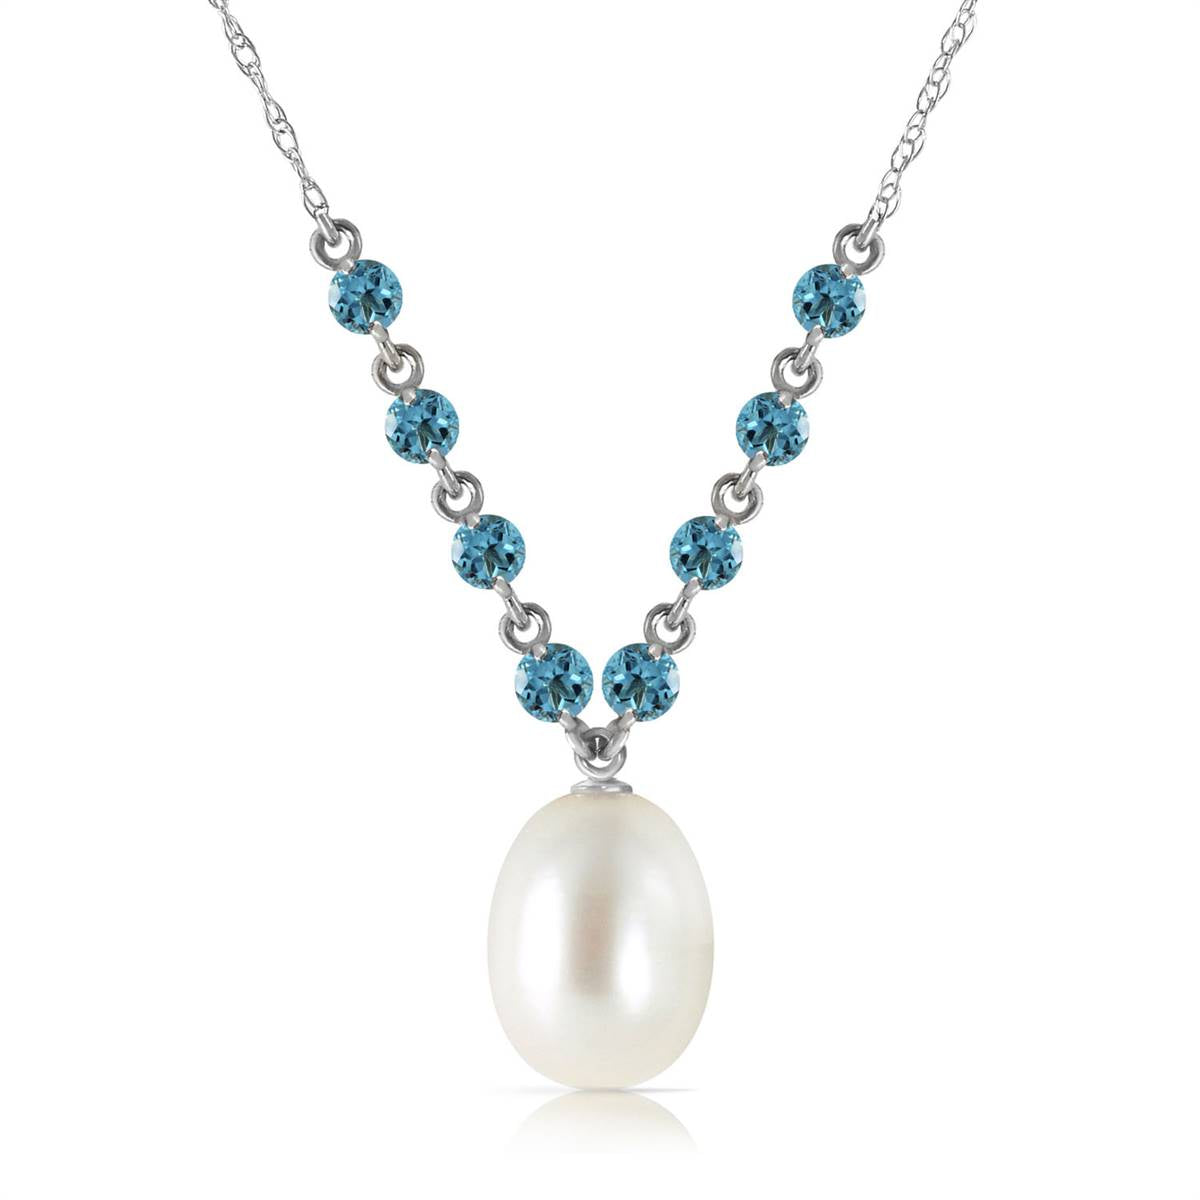 5 Carat 14K Solid White Gold Necklace Natural Blue Topaz Pearl